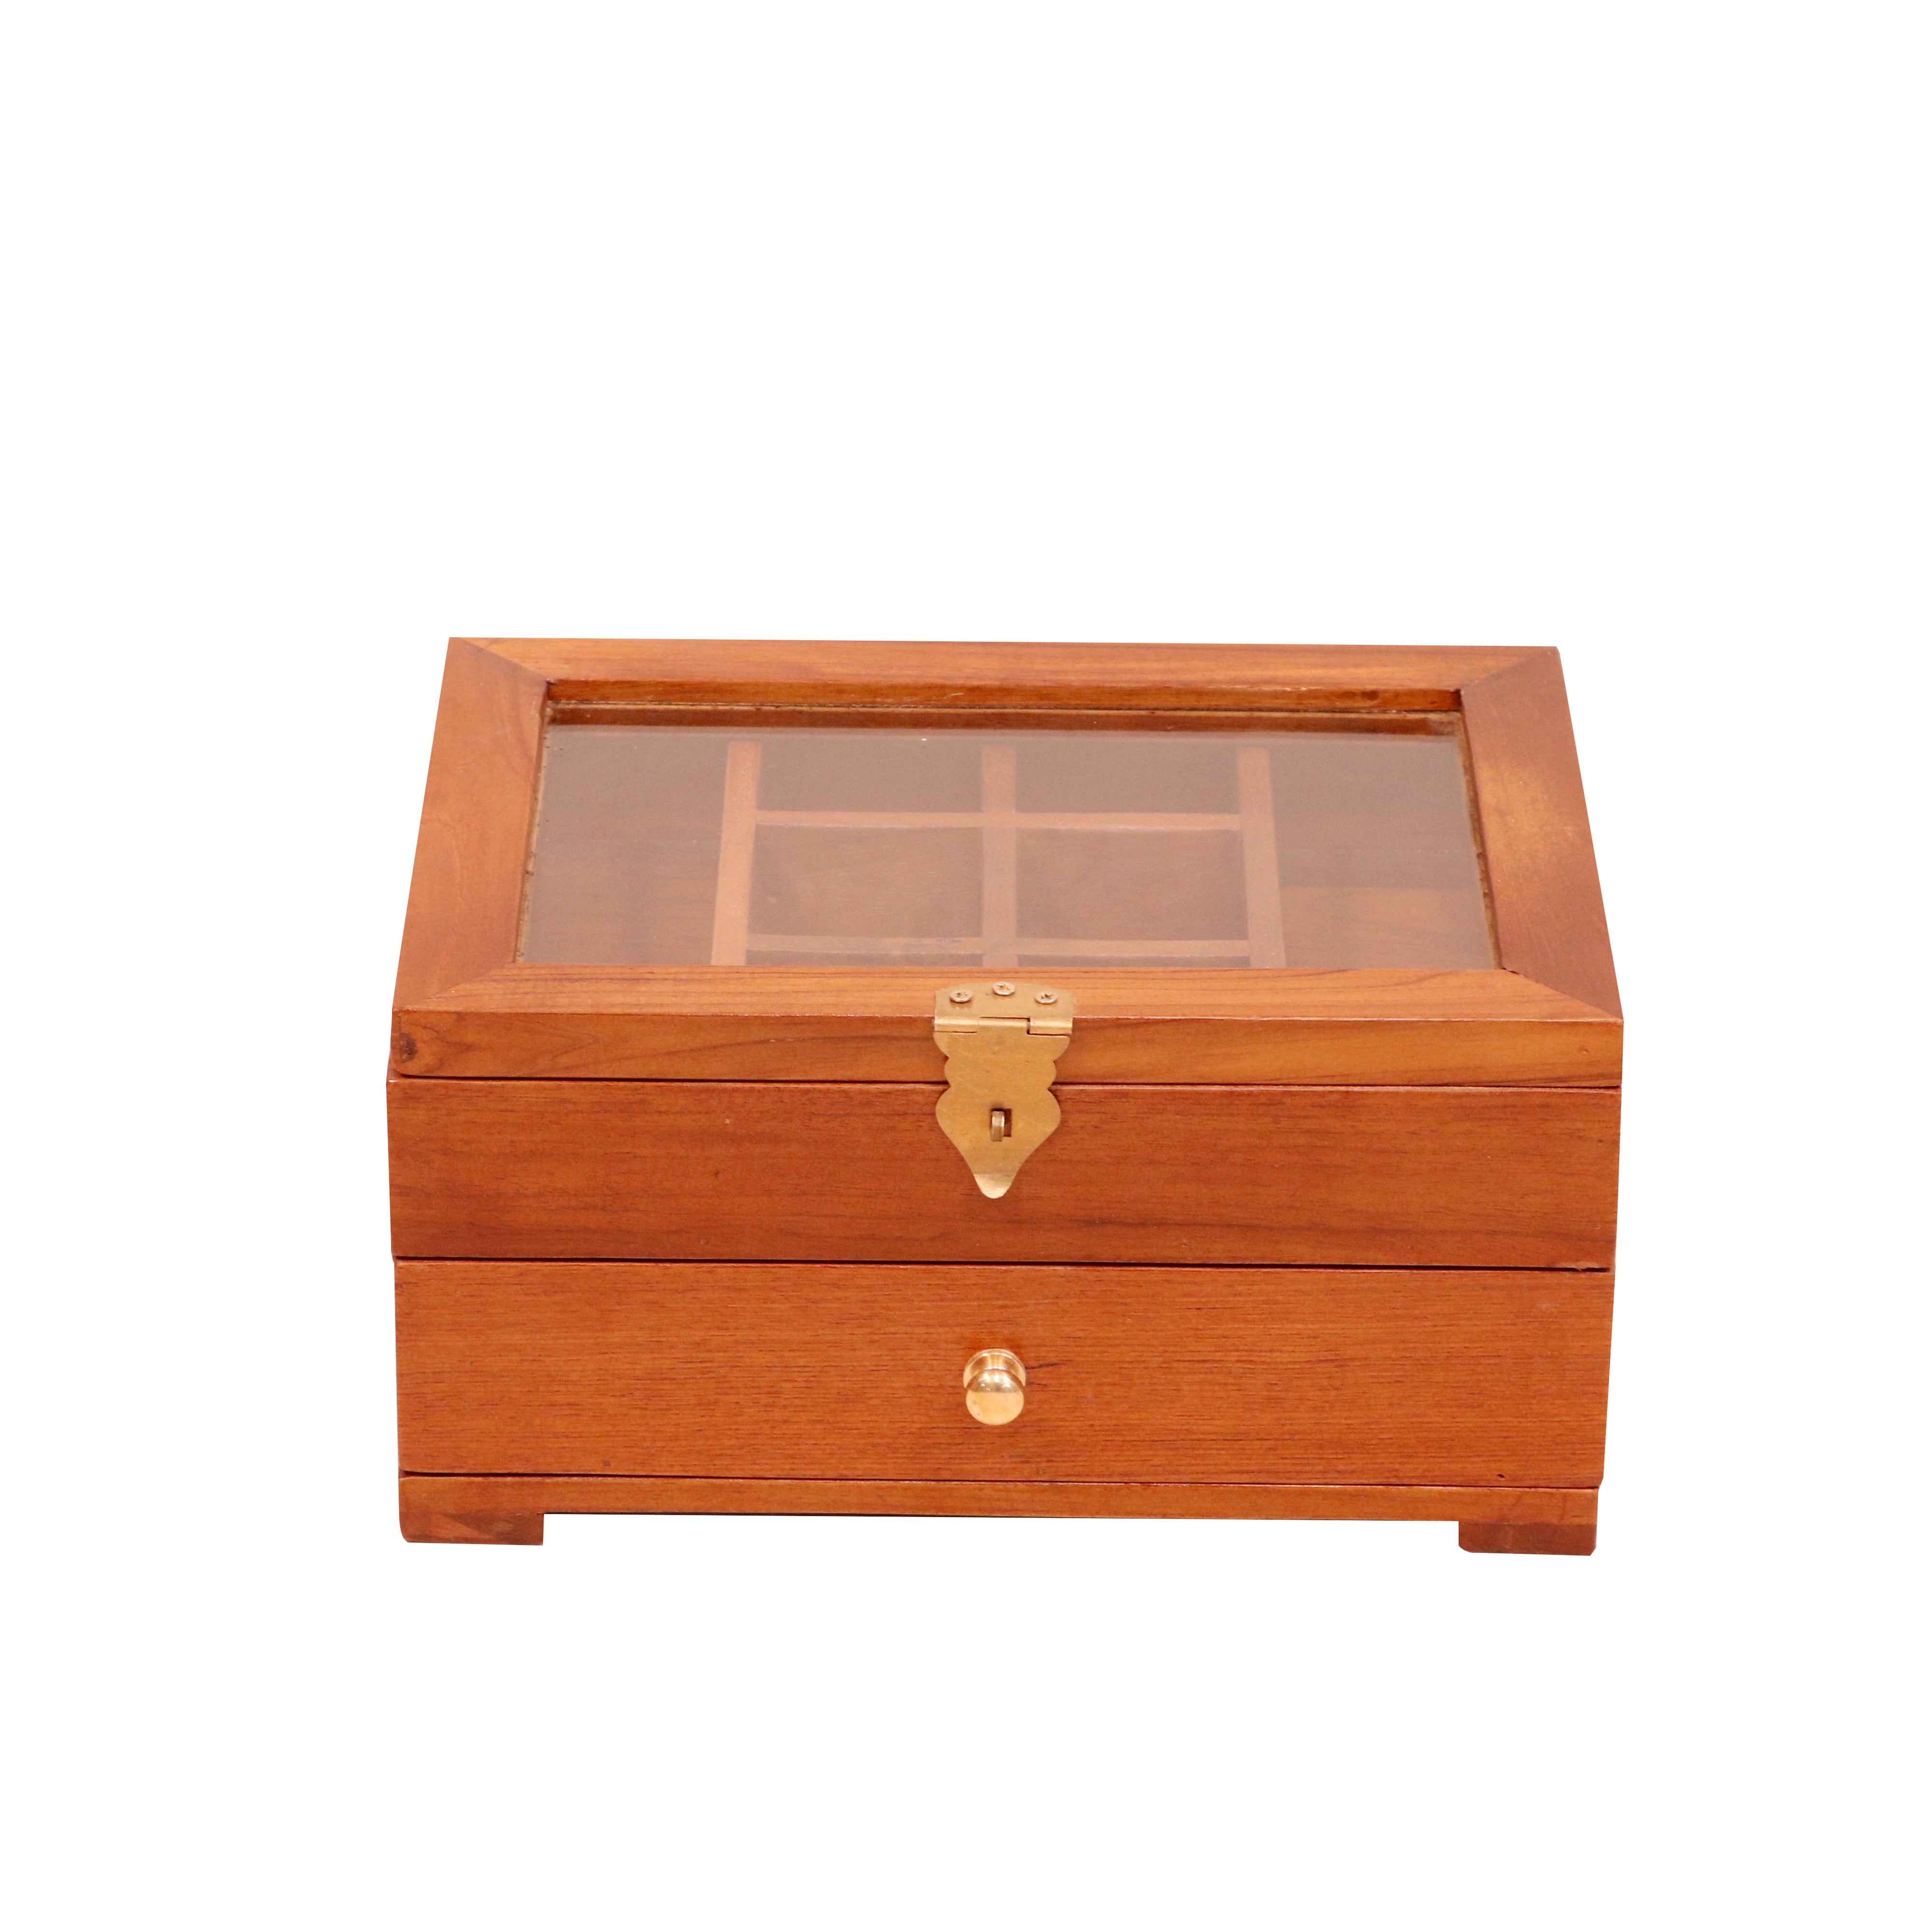 Marvelous Multi-Storage Simple Handmade Wooden Jewelry Box for Home Wooden Box